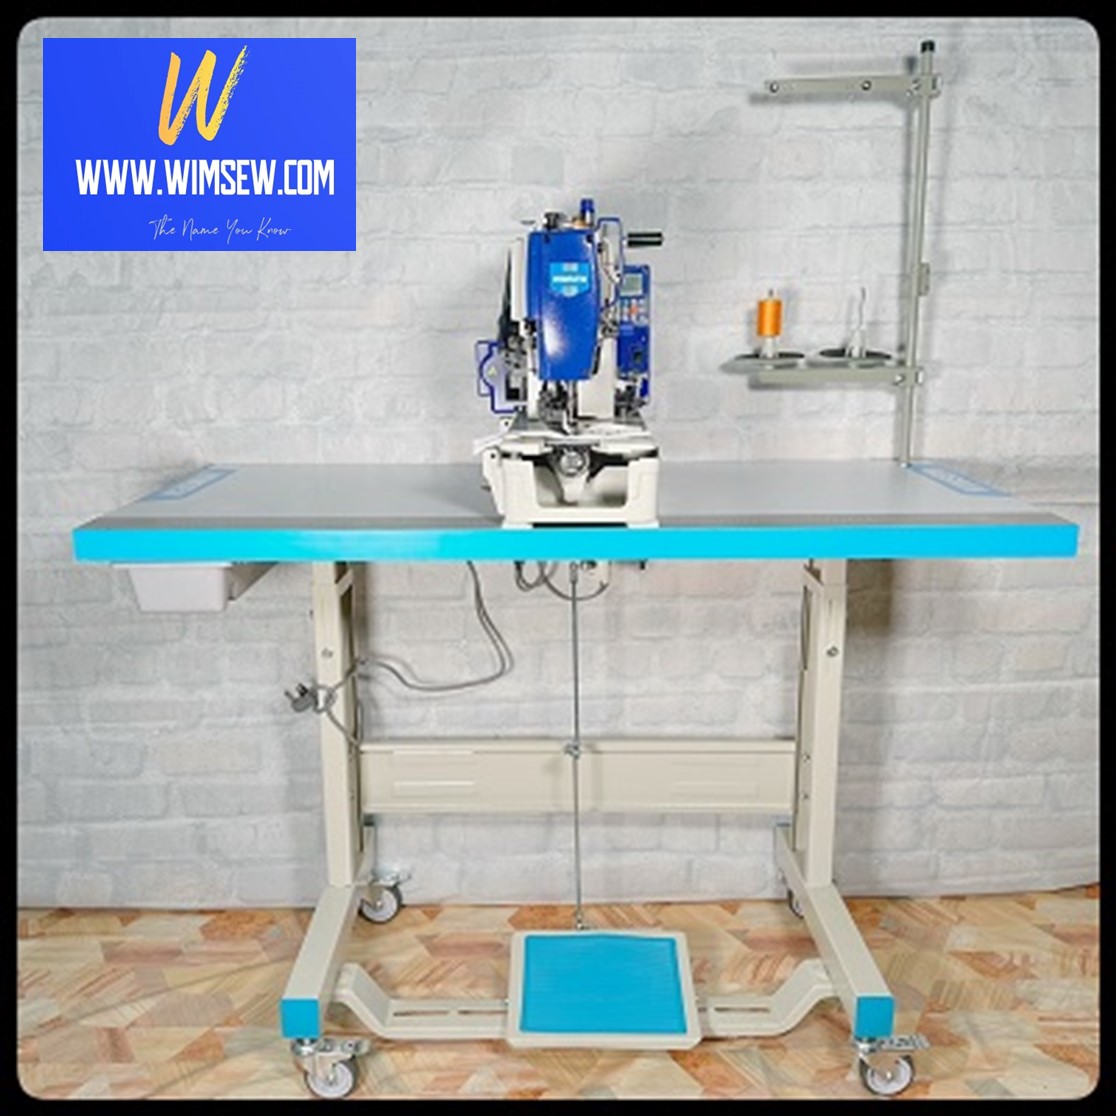 WIMSEW 781D Button Hole Machine - <span style='color: #ff0000;'>Call now for more information. 020 8767 0036 - choose option 3</span>